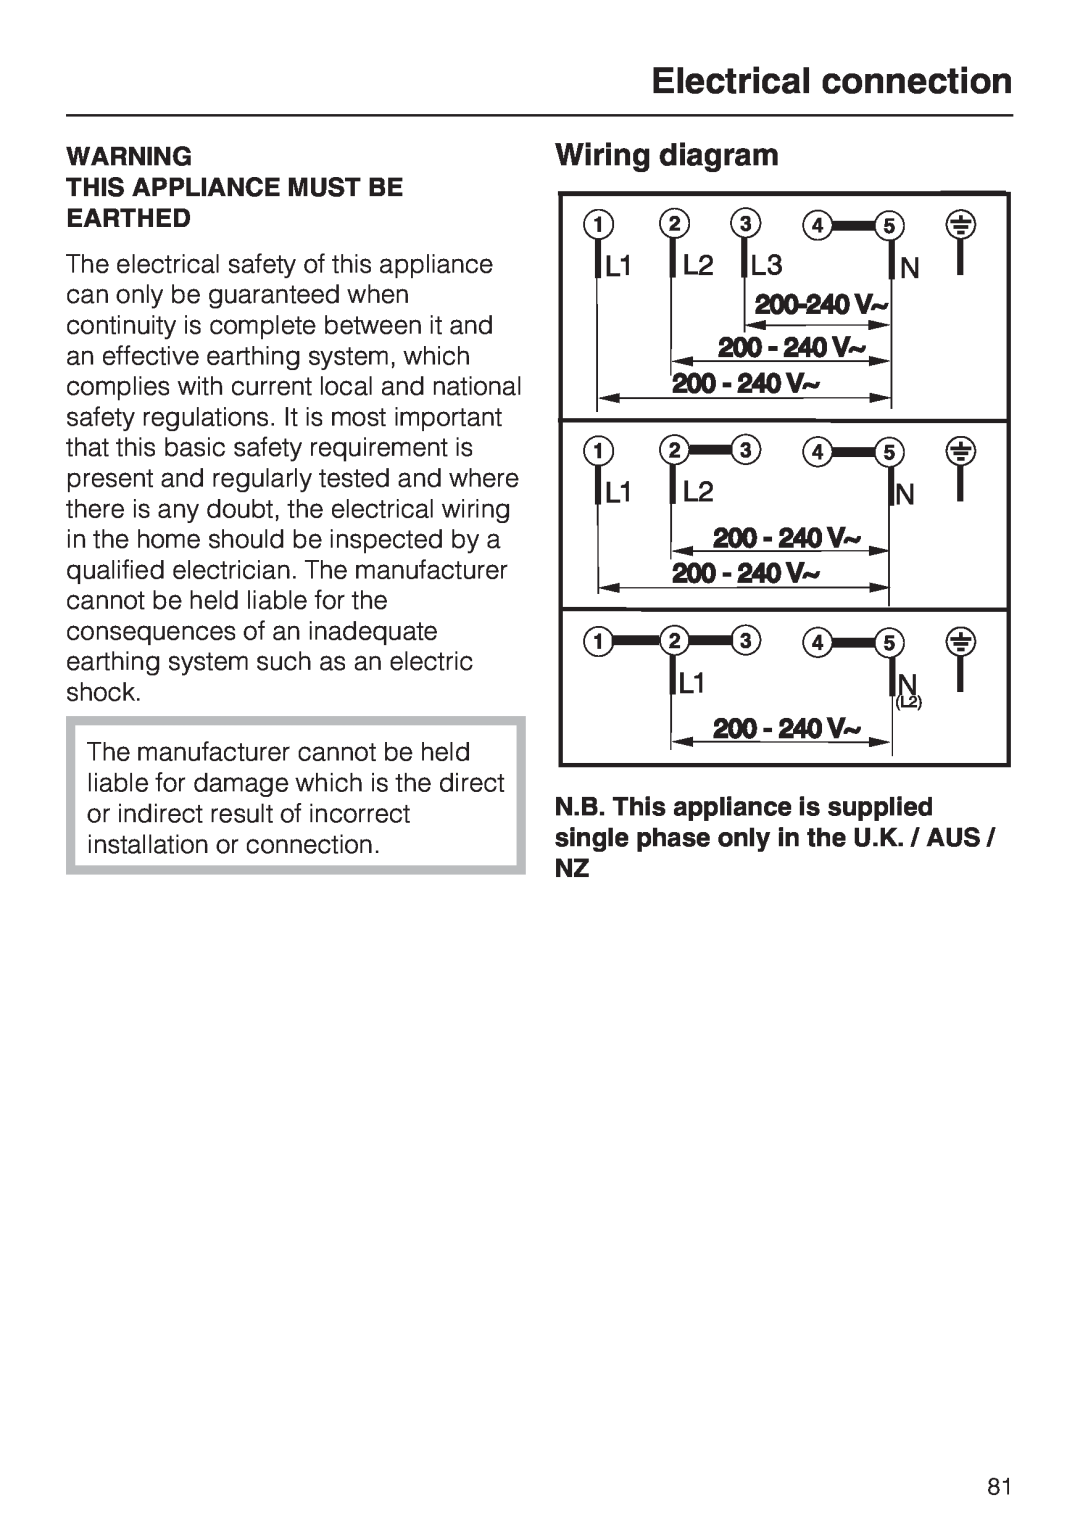 Miele KM5975, KM5956, KM5955, KM5948, KM5942, KM5958 Wiring diagram, This Appliance Must Be Earthed, Electrical connection 